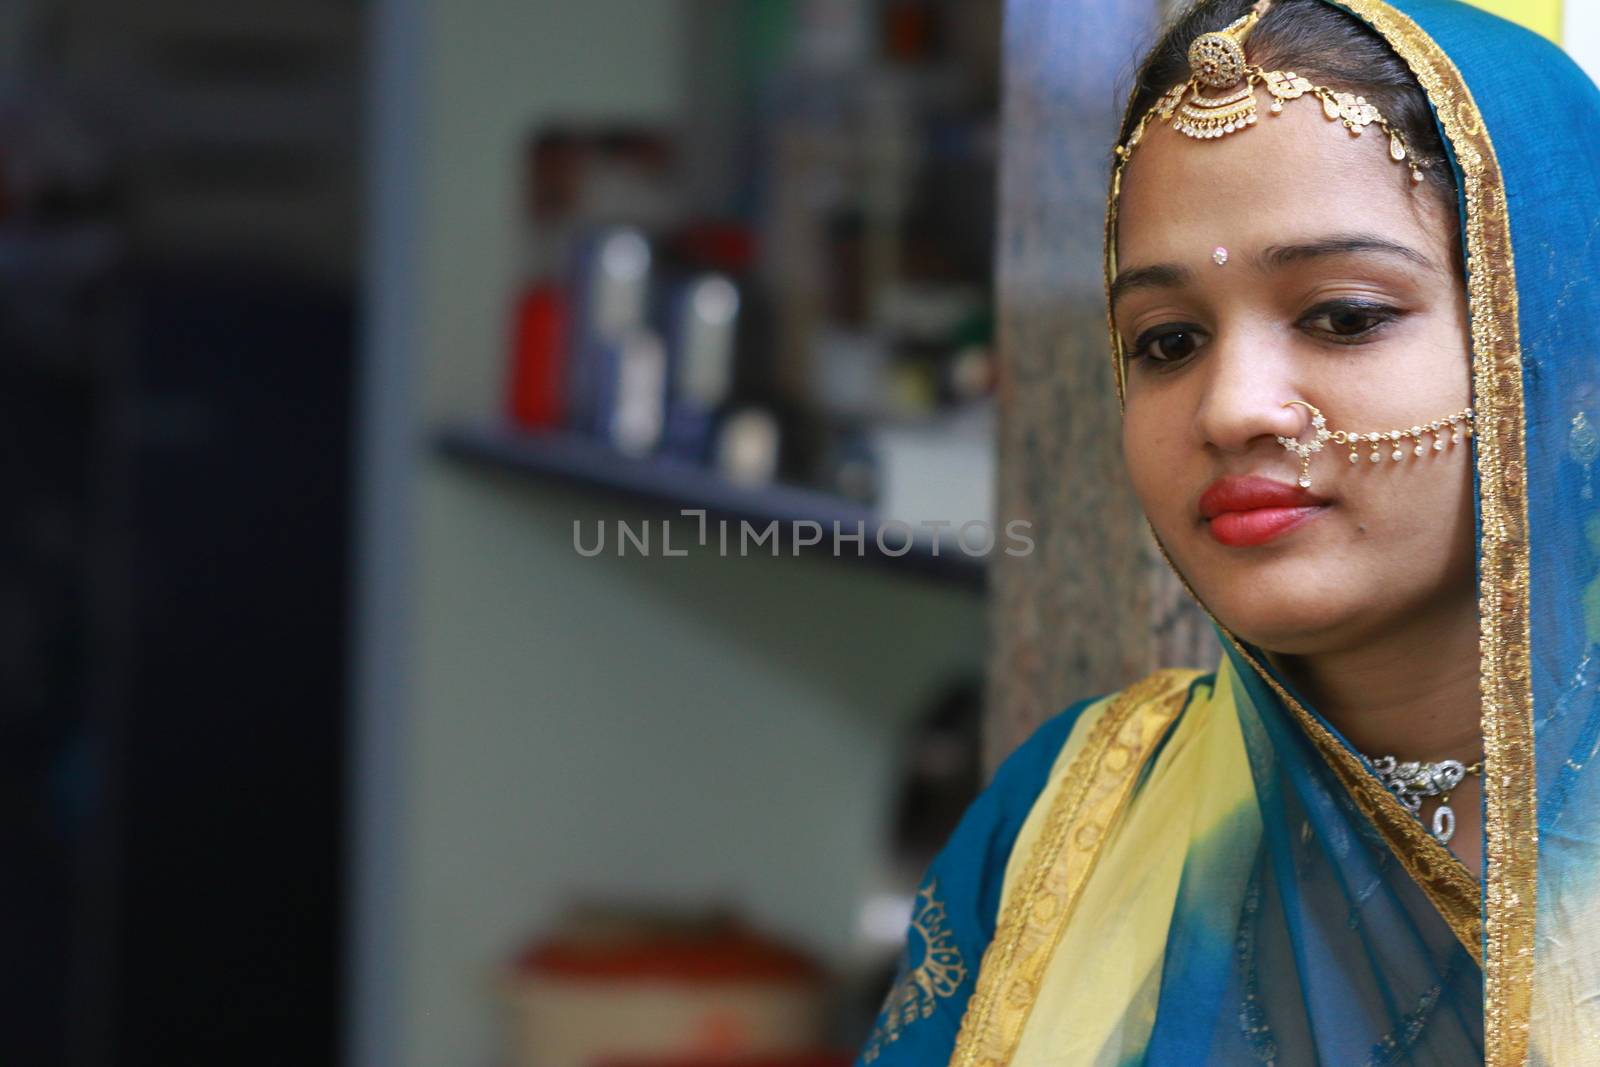 Indoors portrait of woman with traditional Rajasthani head gold jewellery (Maang tikka).